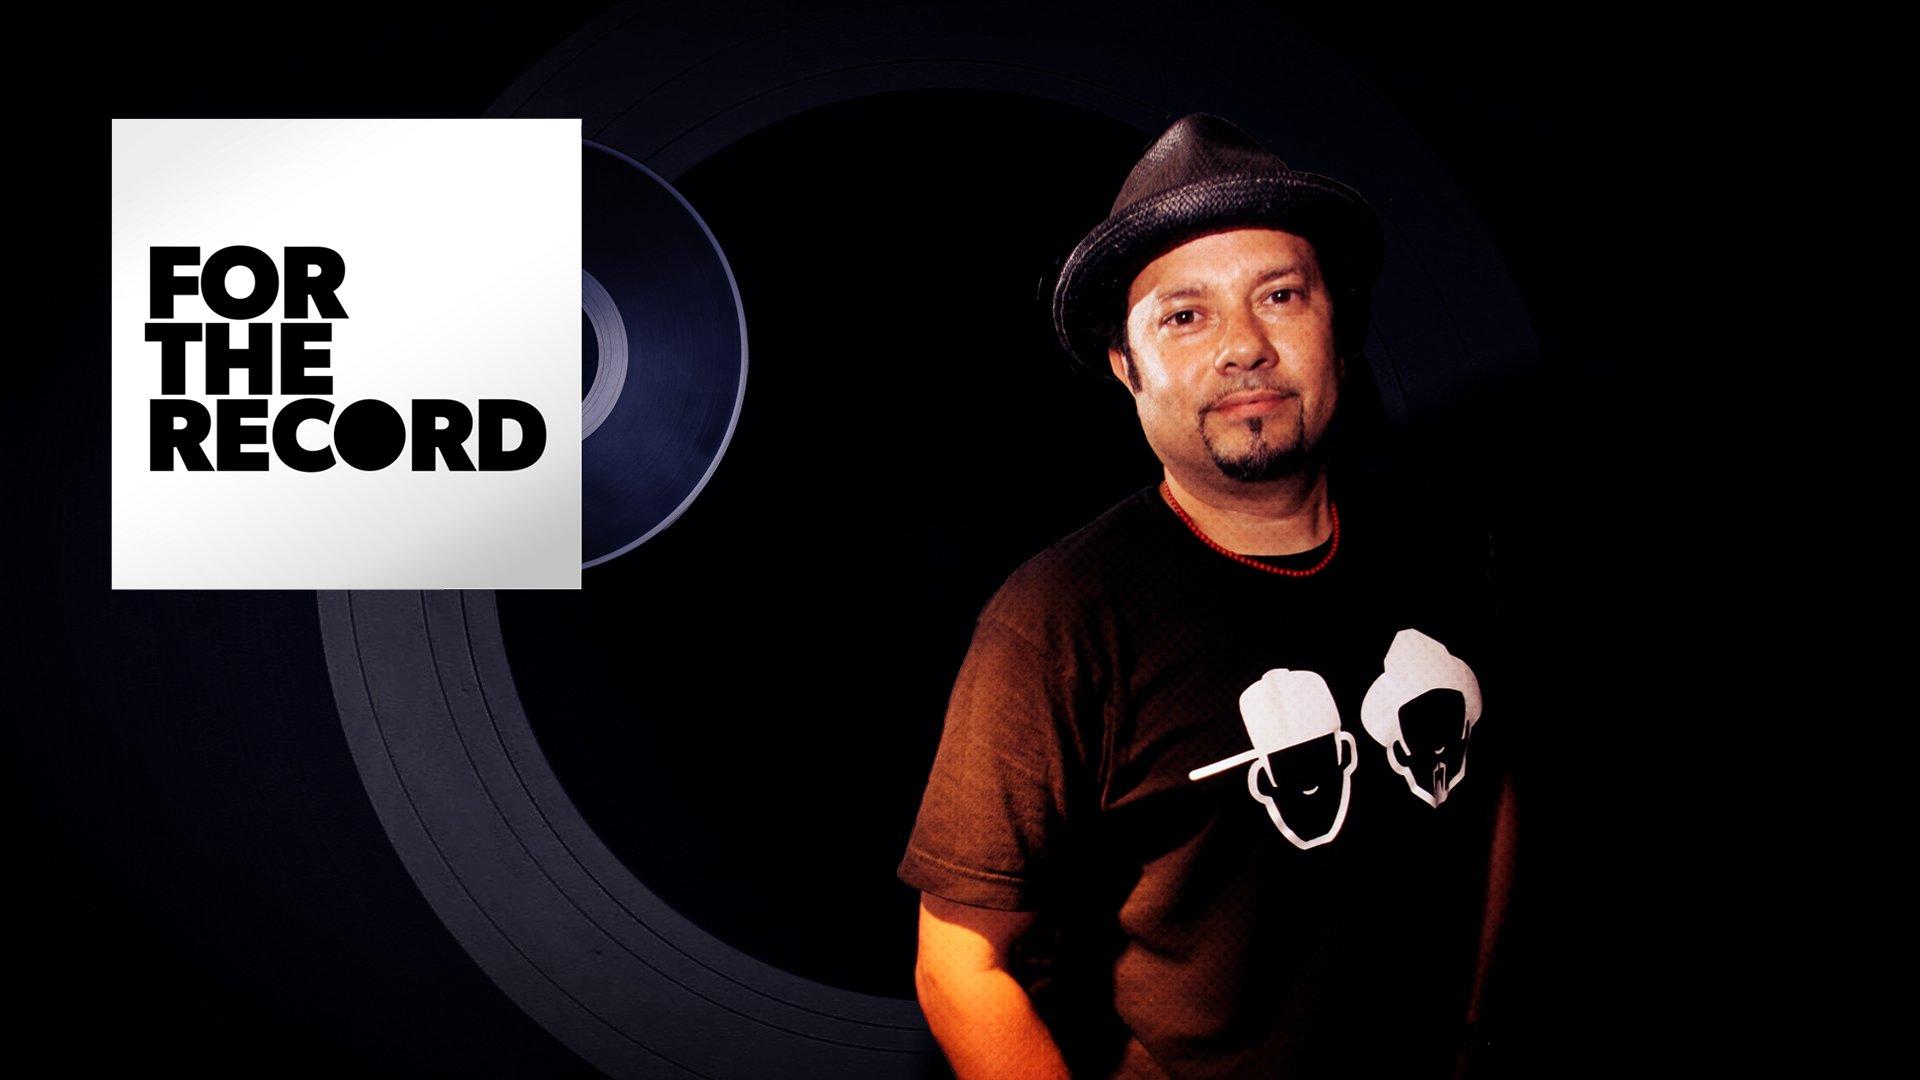 "Little" Louie Vega smiles at the camera while wearing his merchandise